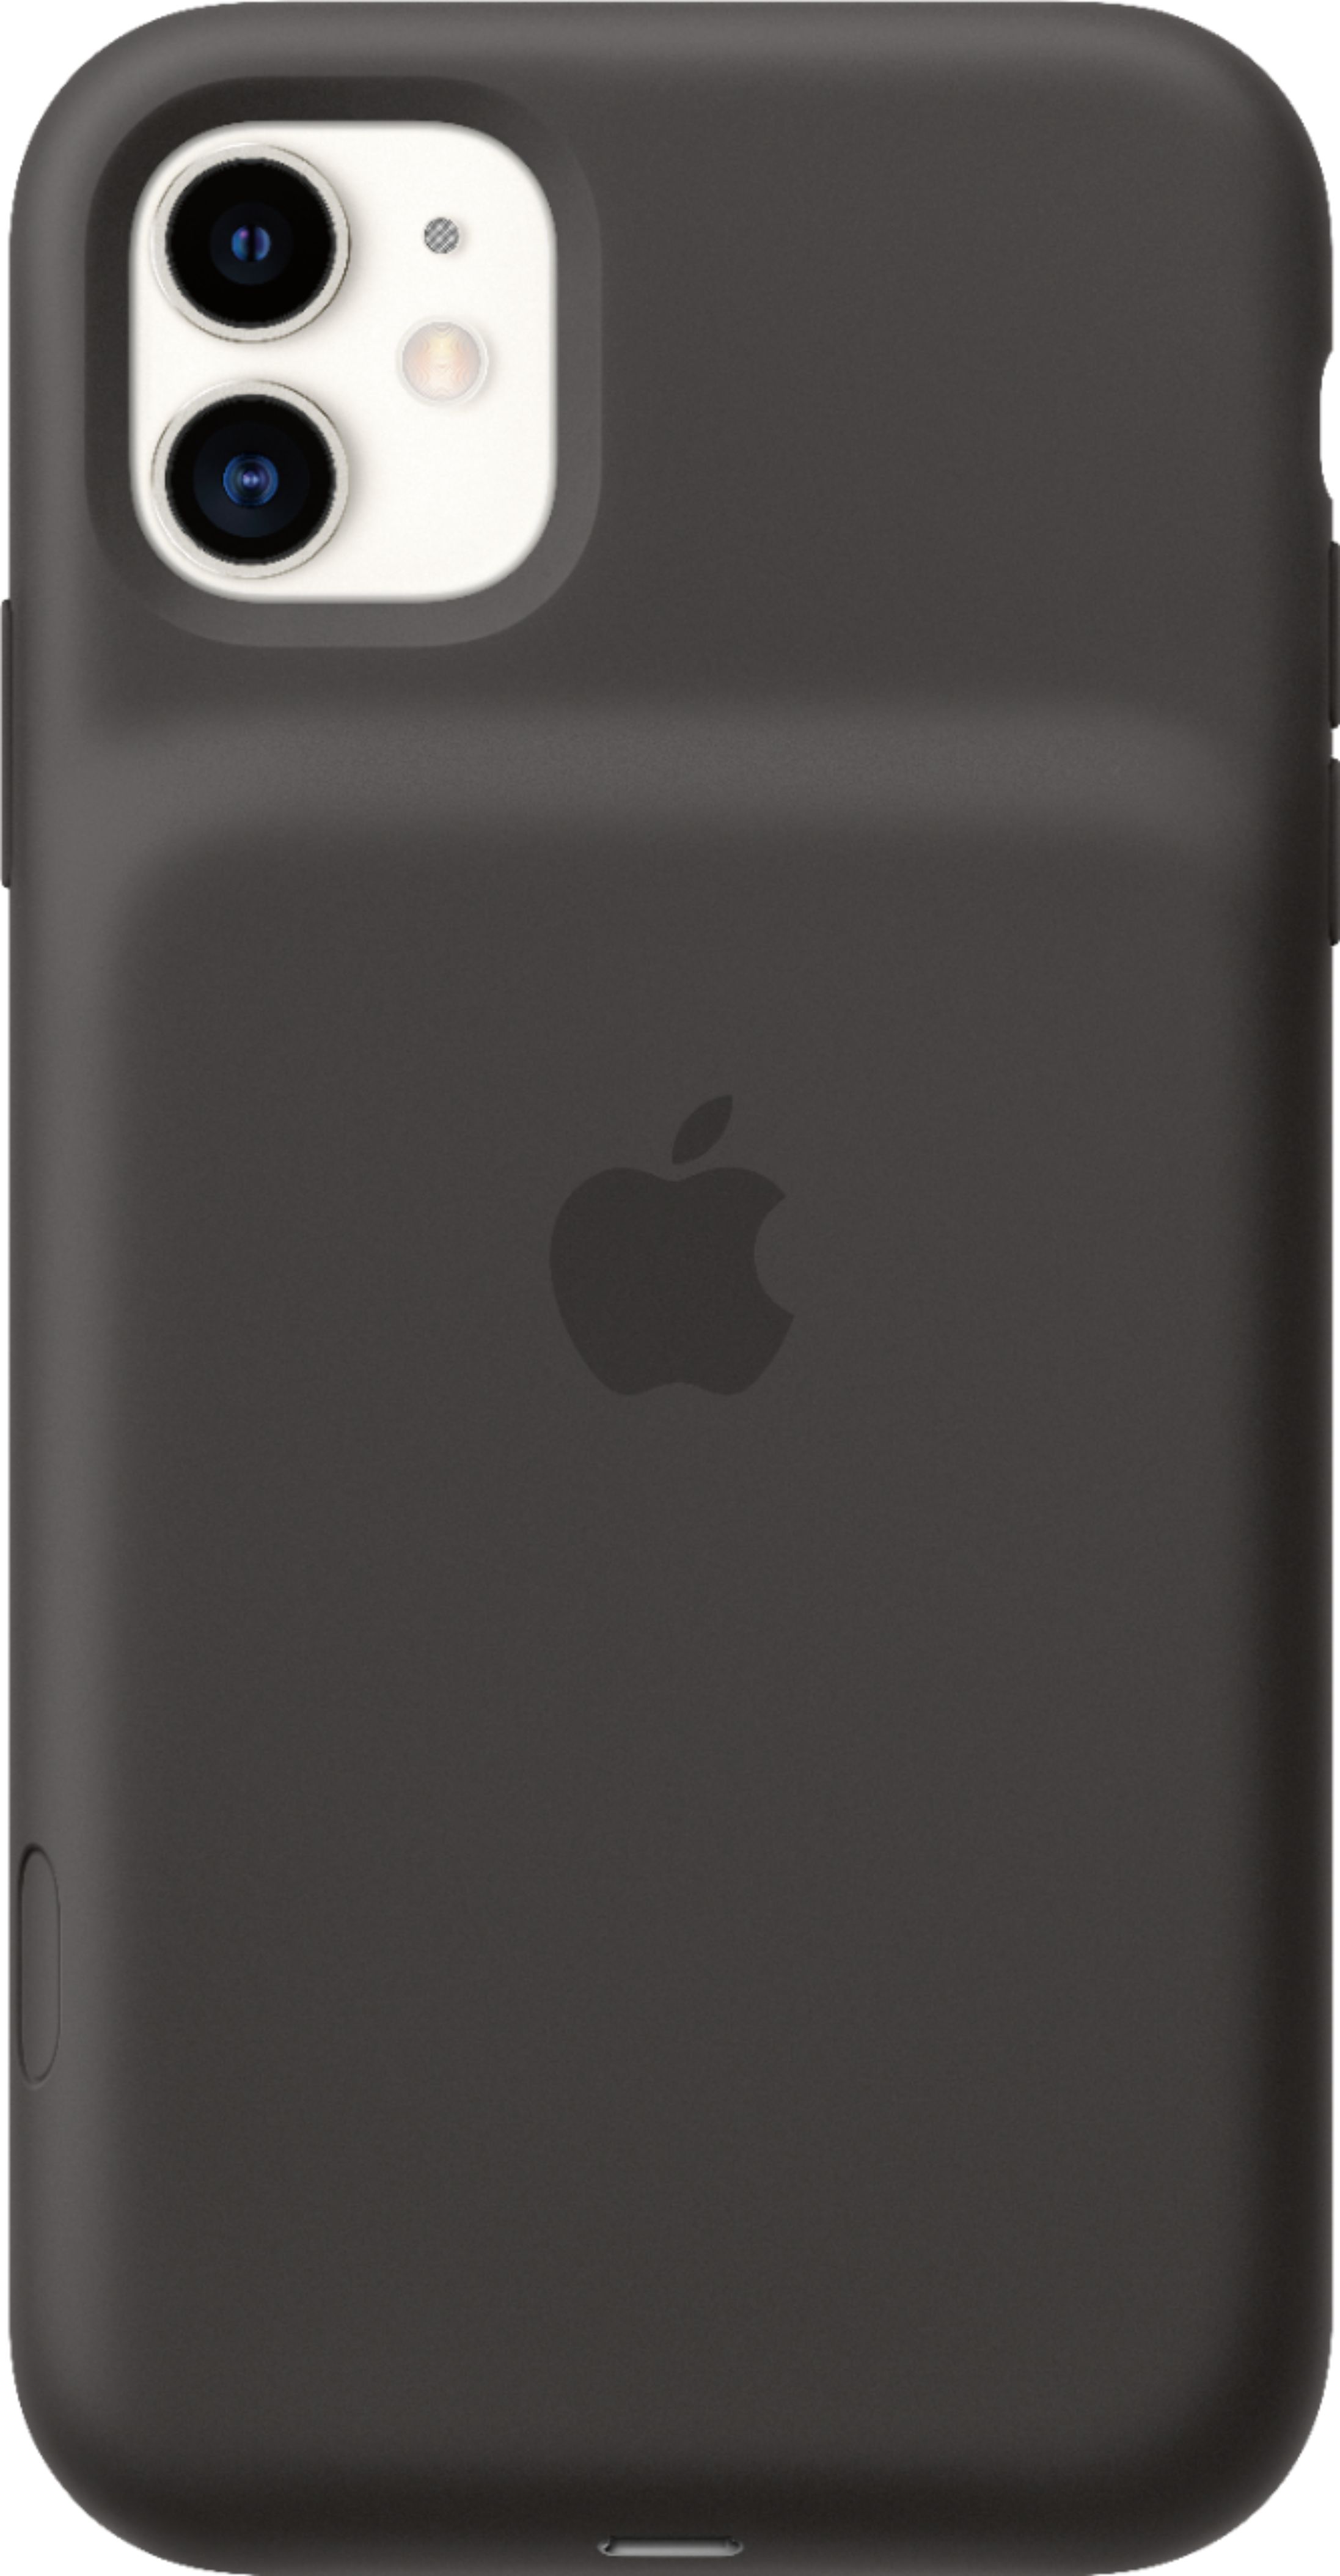 Best Buy: Apple iPhone 11 Smart Battery Case Black MWVH2LL/A